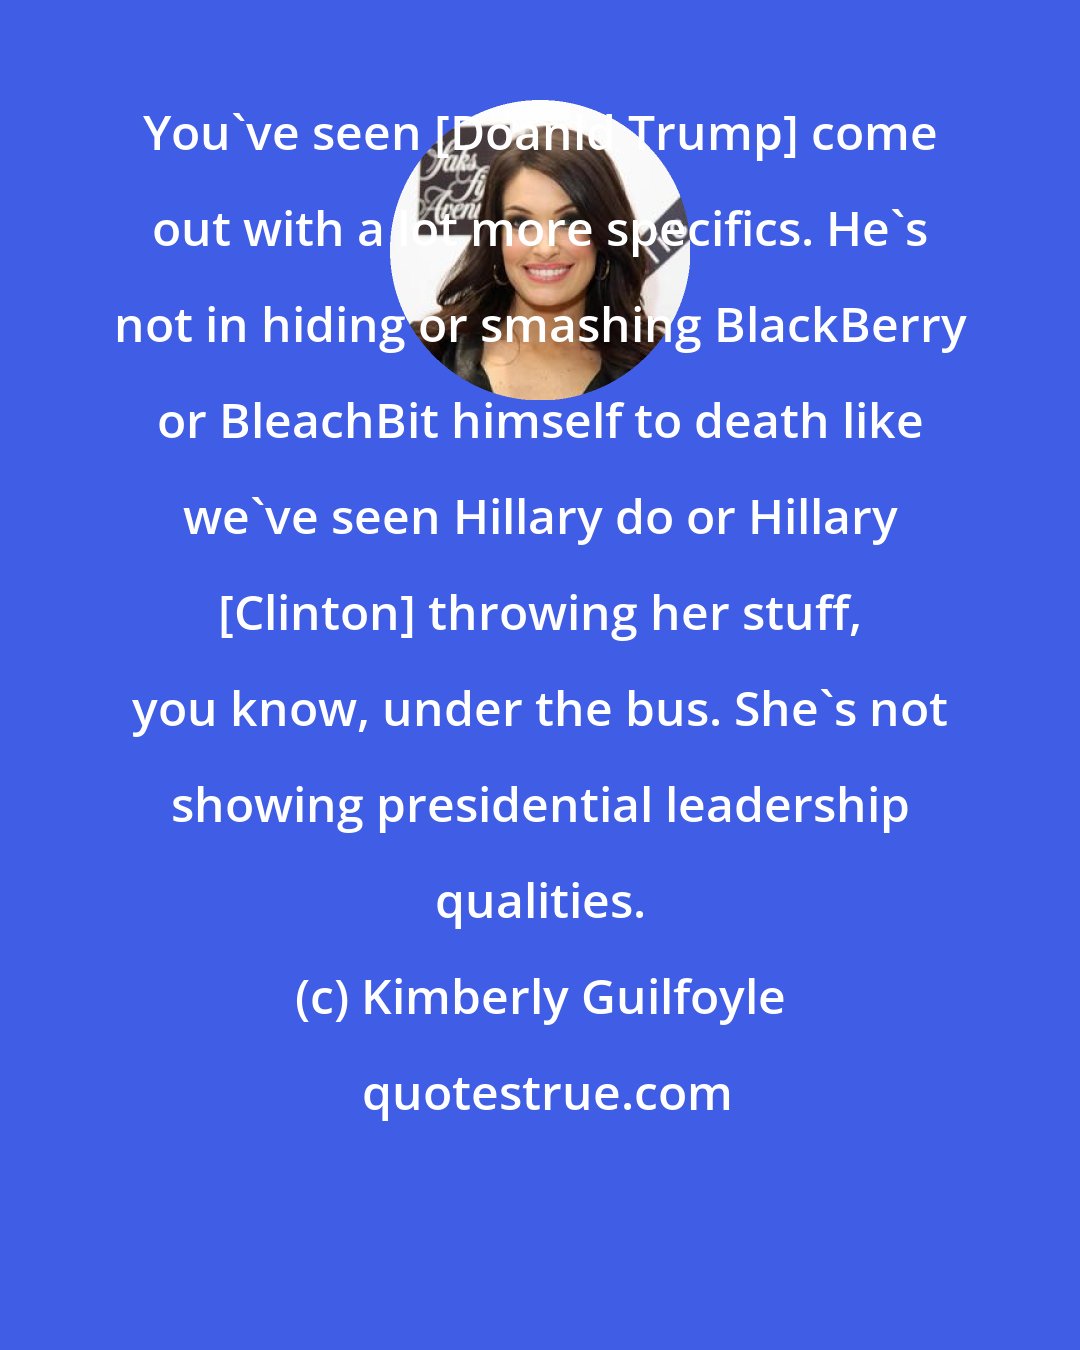 Kimberly Guilfoyle: You've seen [Doanld Trump] come out with a lot more specifics. He's not in hiding or smashing BlackBerry or BleachBit himself to death like we've seen Hillary do or Hillary [Clinton] throwing her stuff, you know, under the bus. She's not showing presidential leadership qualities.